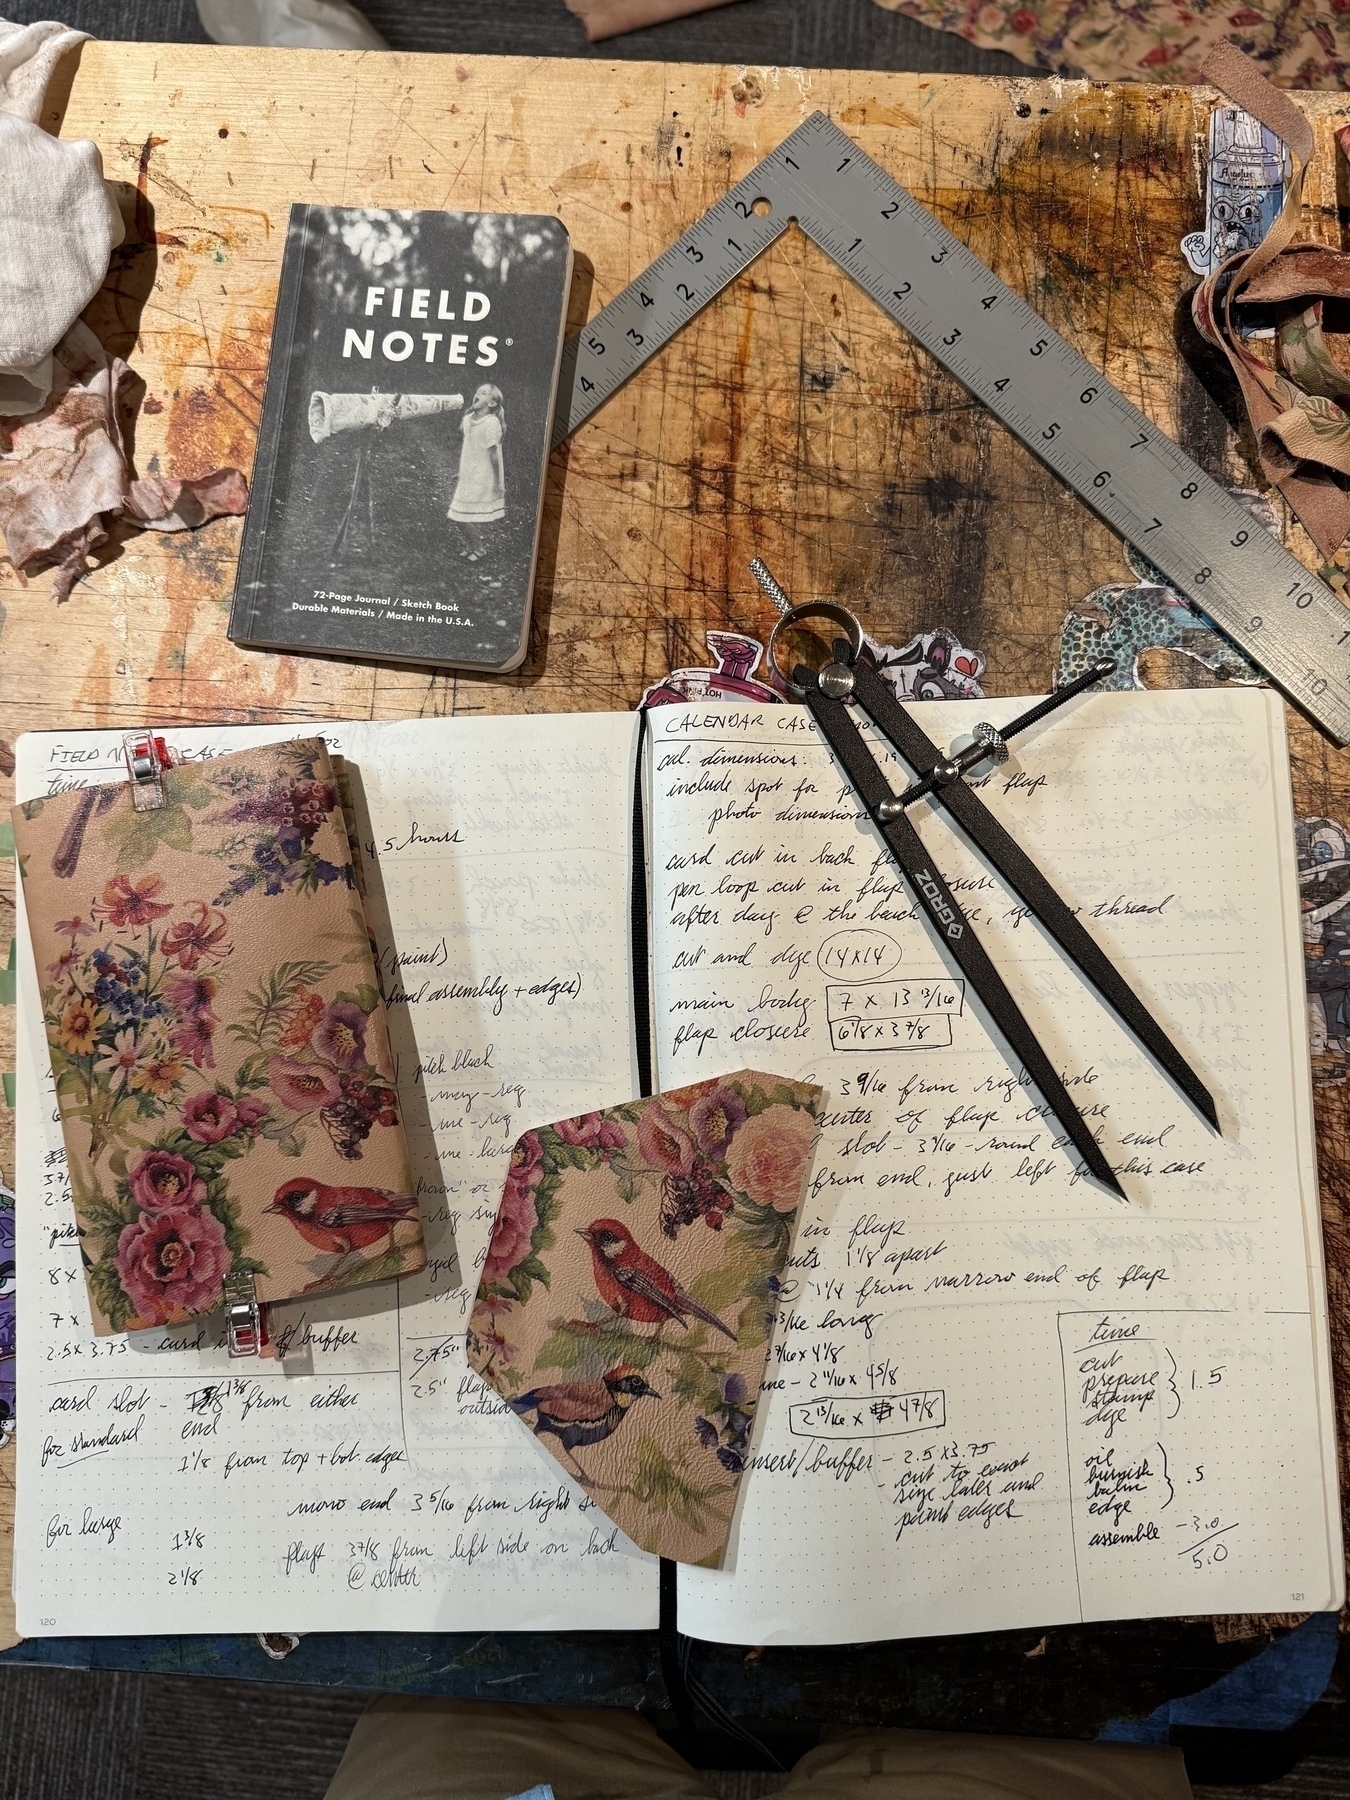 A workbench is cluttered with a patterned notebook, fabric with floral and bird designs, an open lined journal with handwritten notes, a black "Field Notes" booklet, a ruler, and drafting tools.